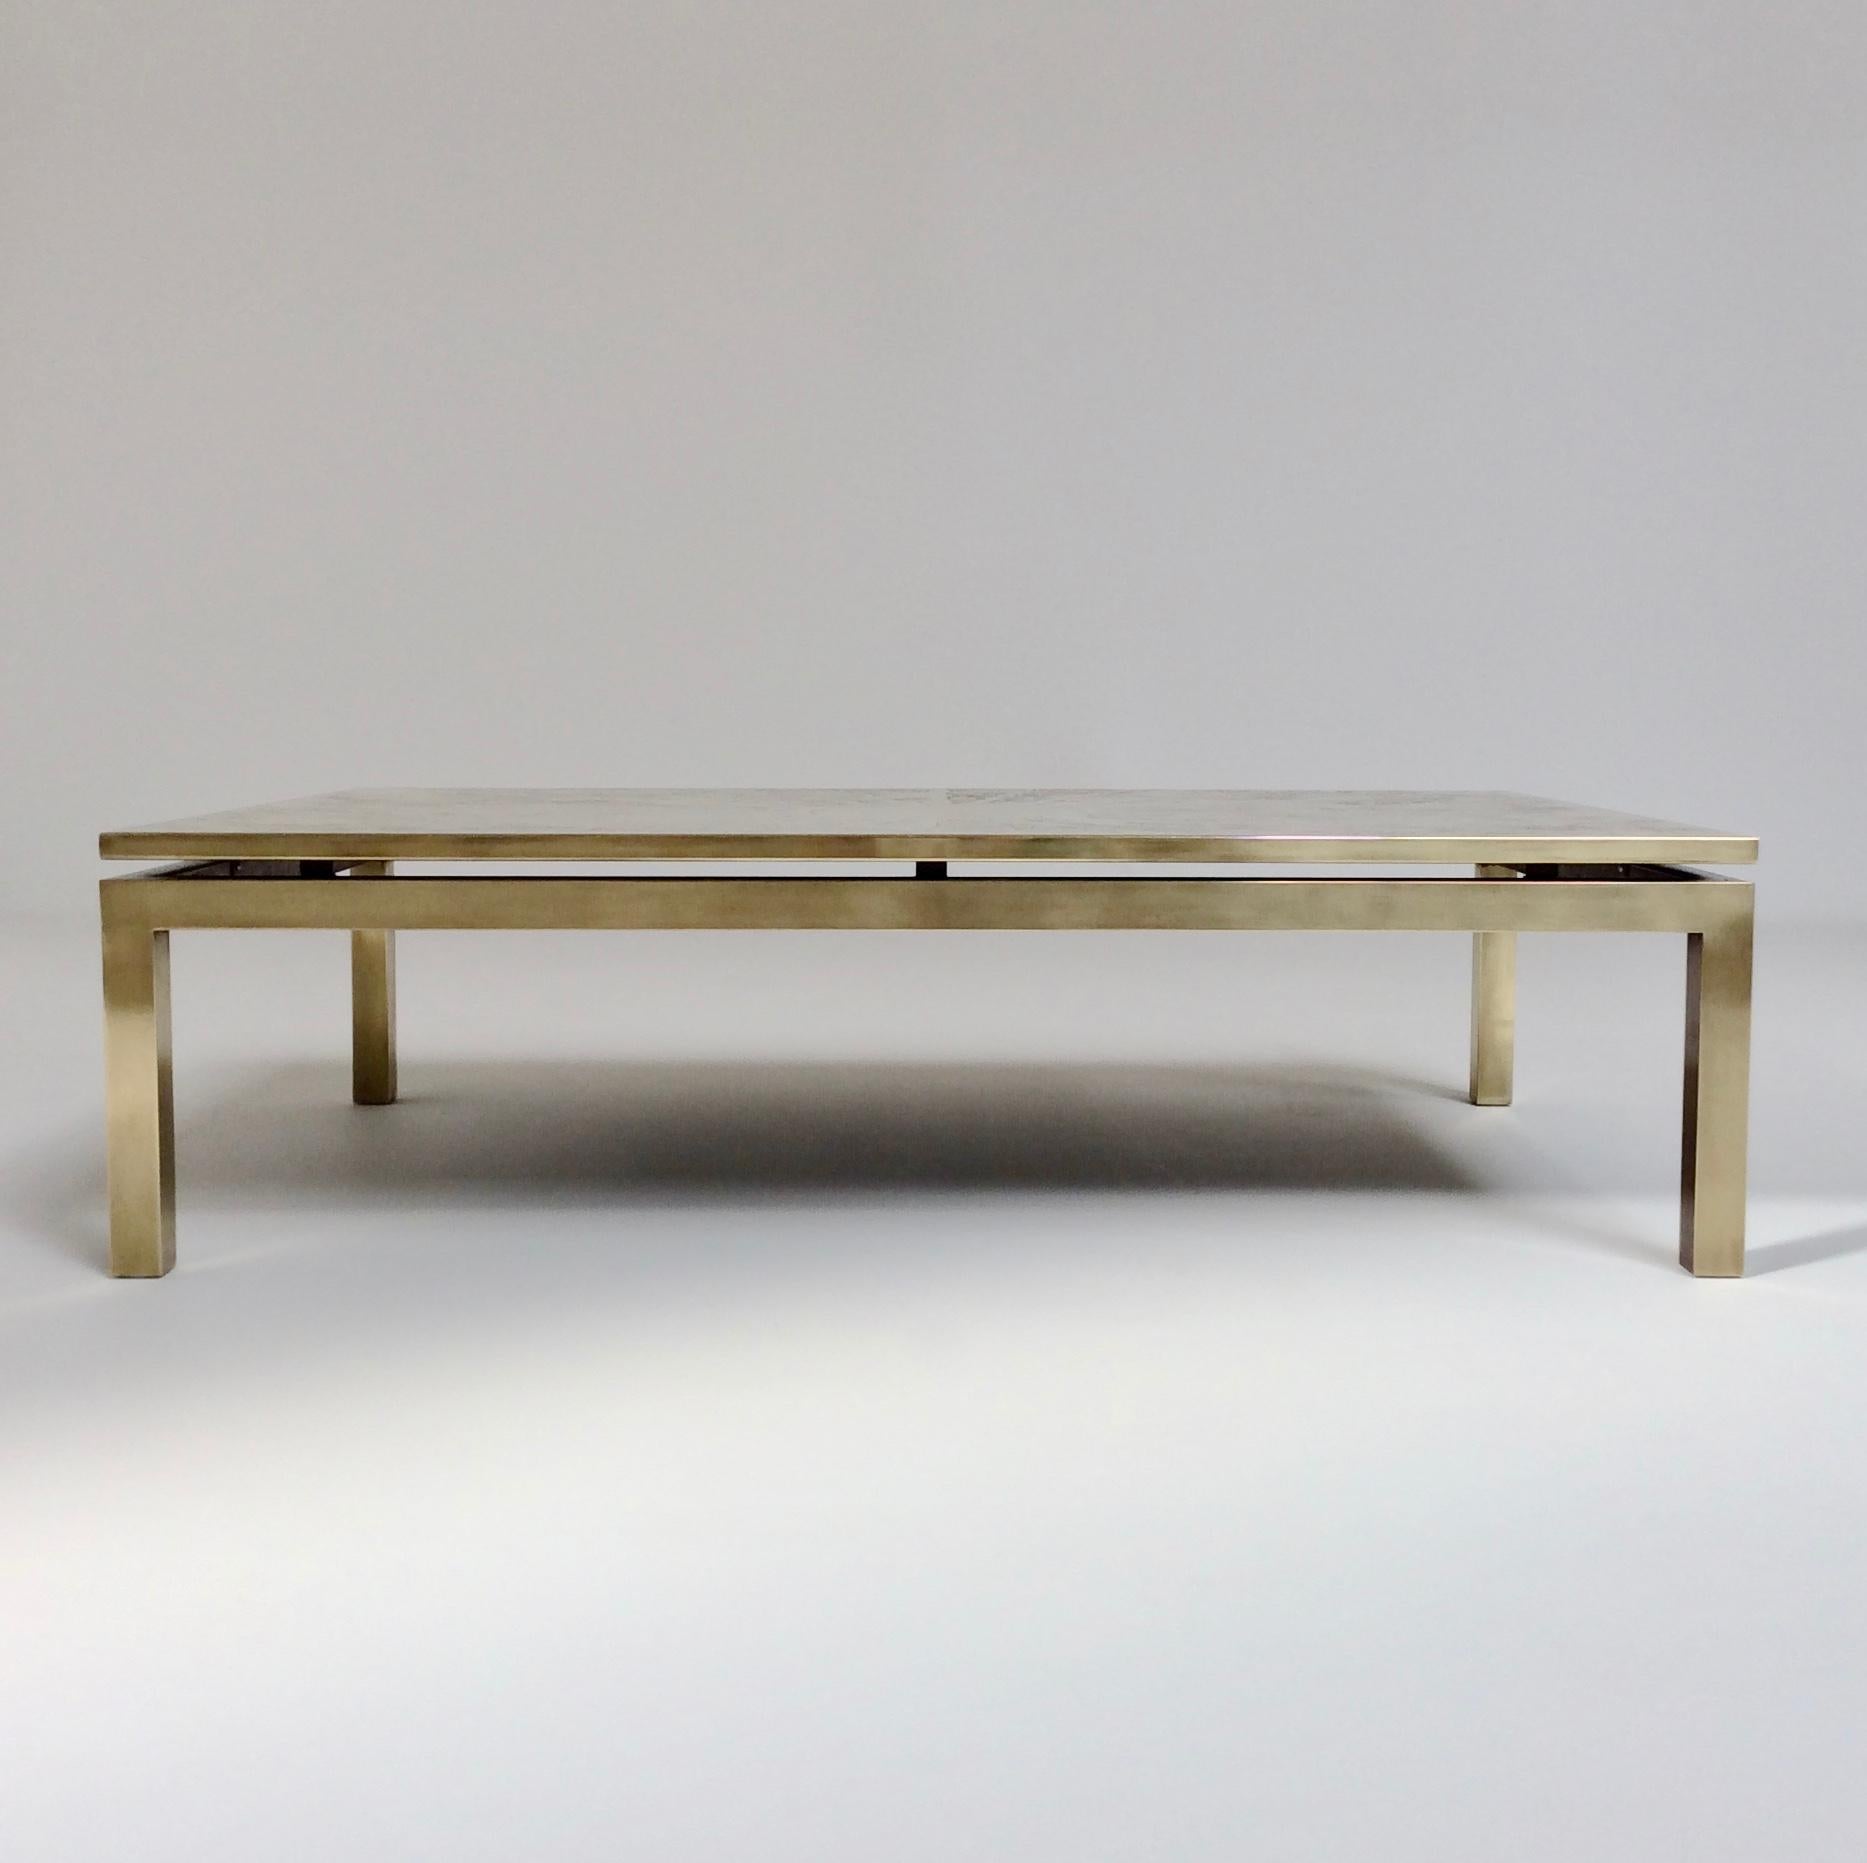 Space Age Etched Brass Coffee Table, 1970s, Belgium